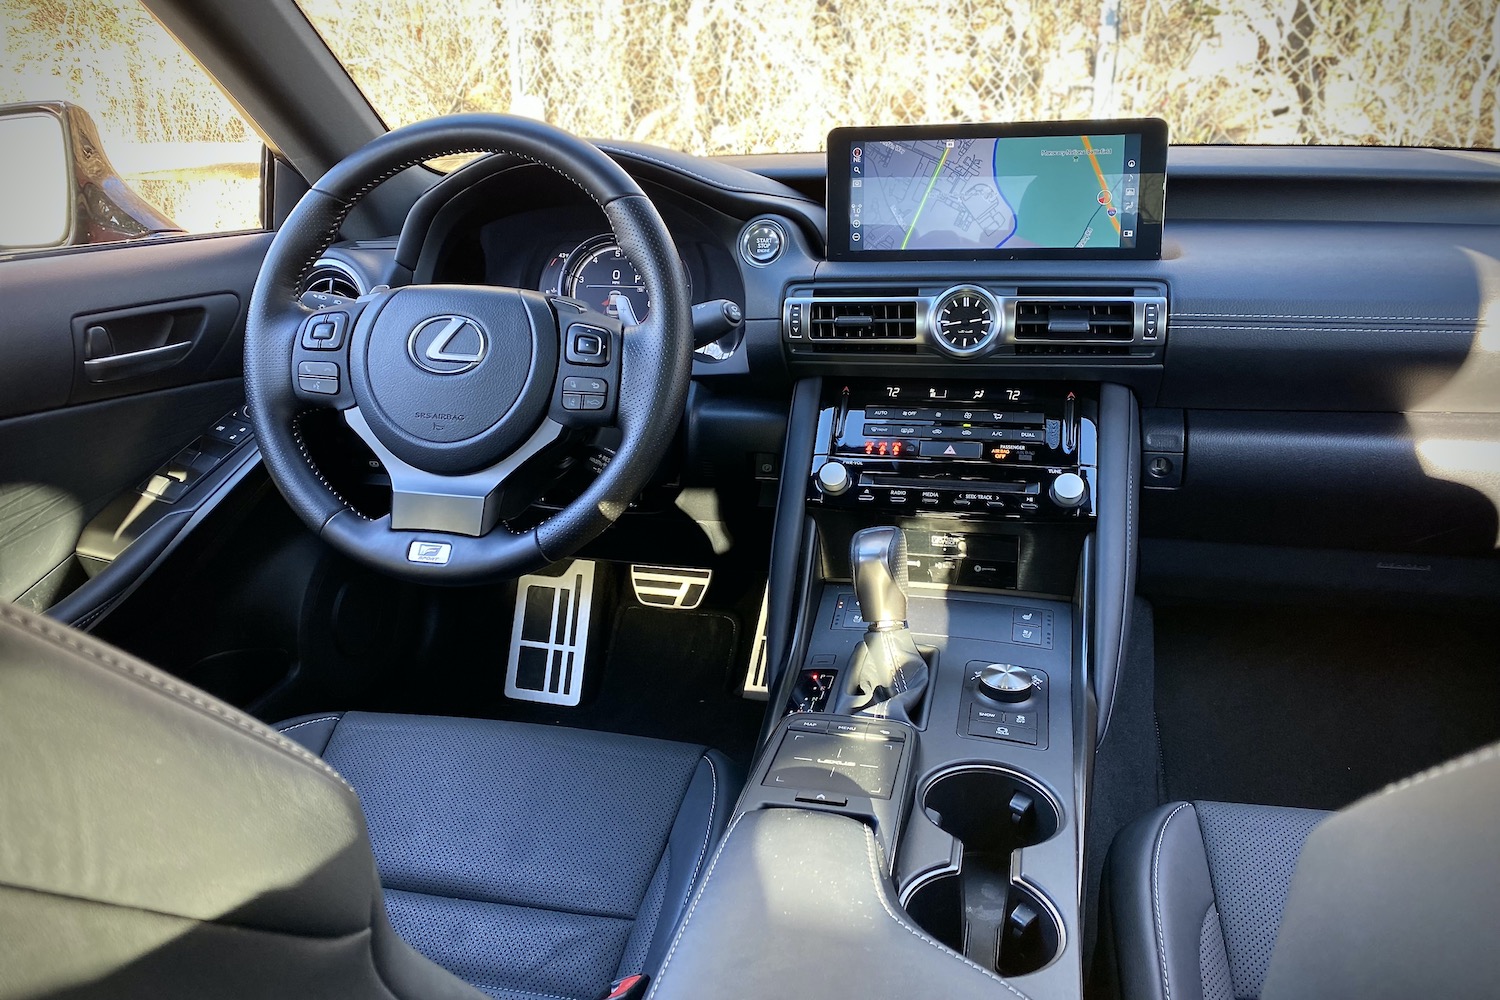 Lexus IS 500 dashboard from passenger's side rear seats with trees in the back.